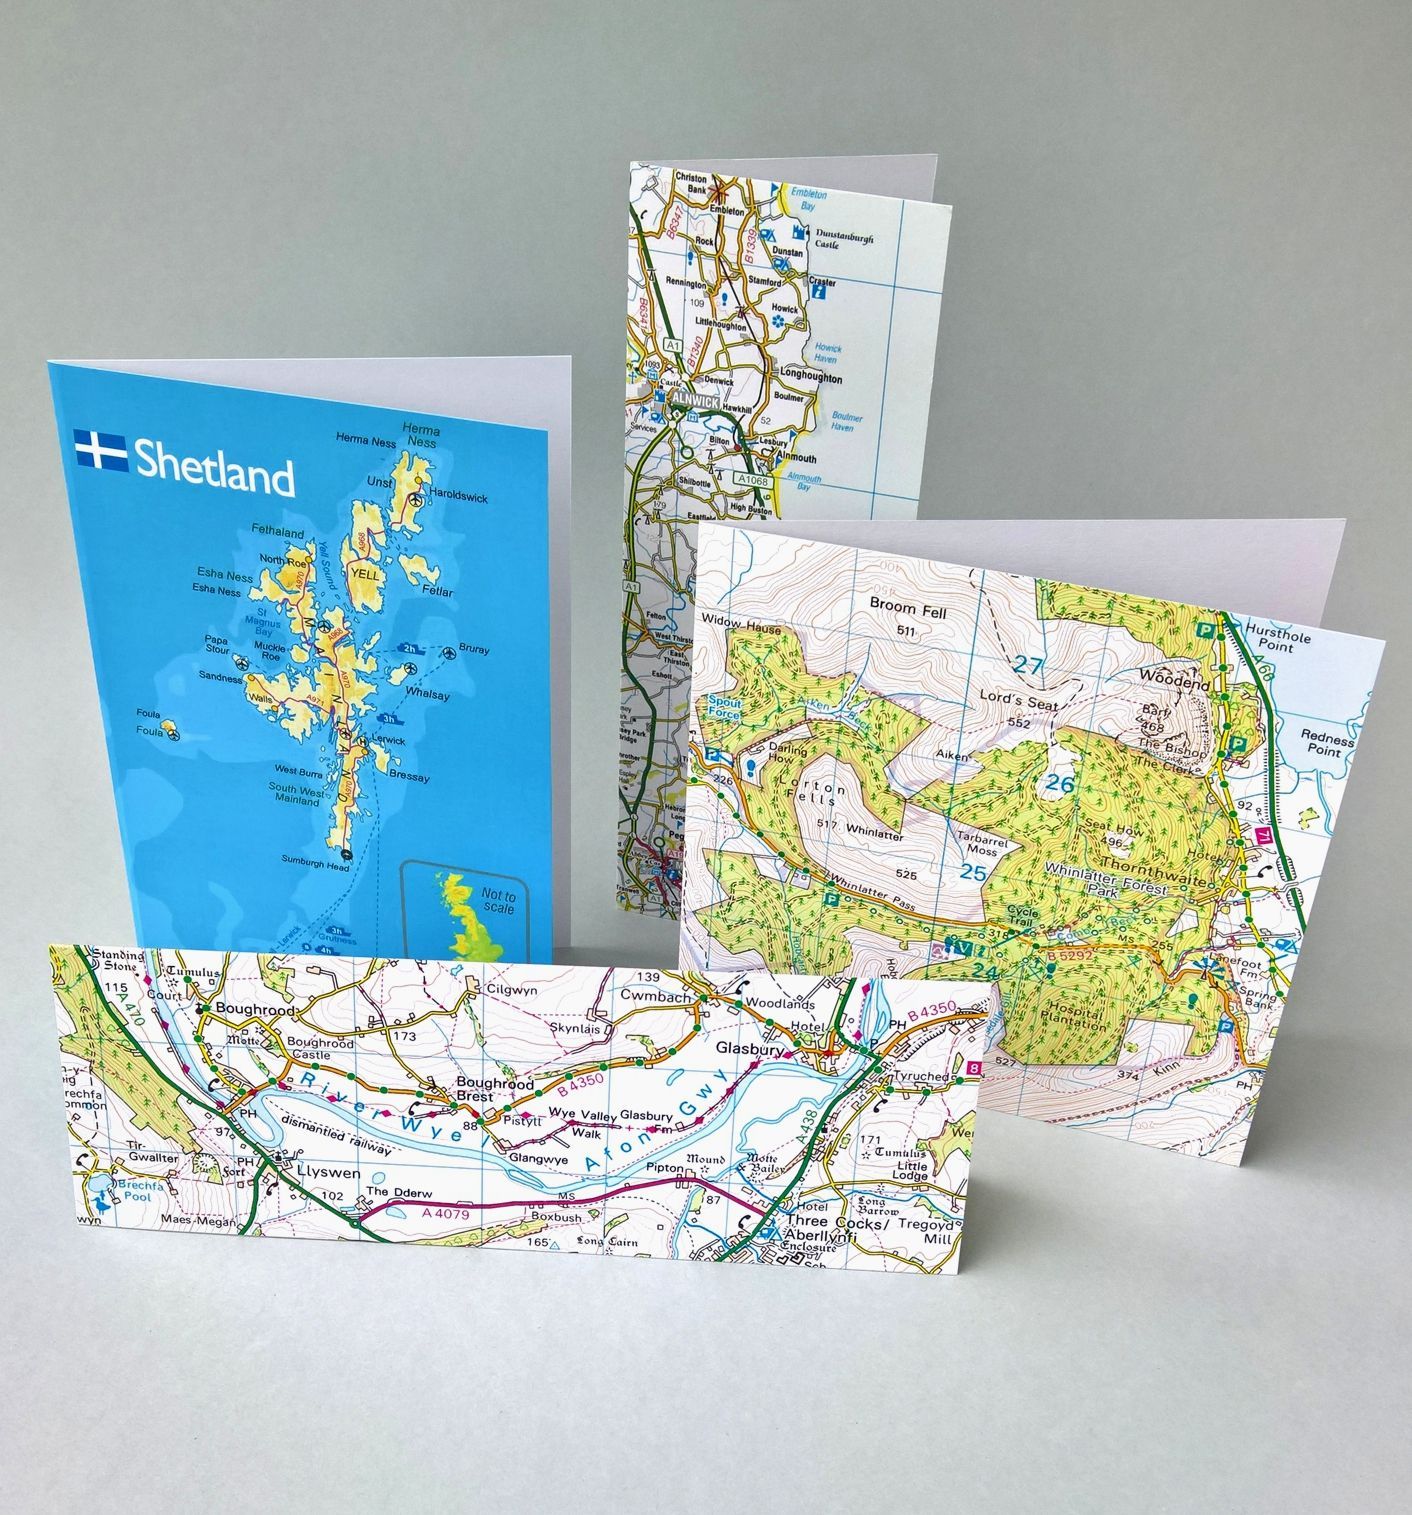 Stationery & Gift - notebooks, shopping pads, jigsaws in tins, boxed crayons, puzzle postcards & greetings cards